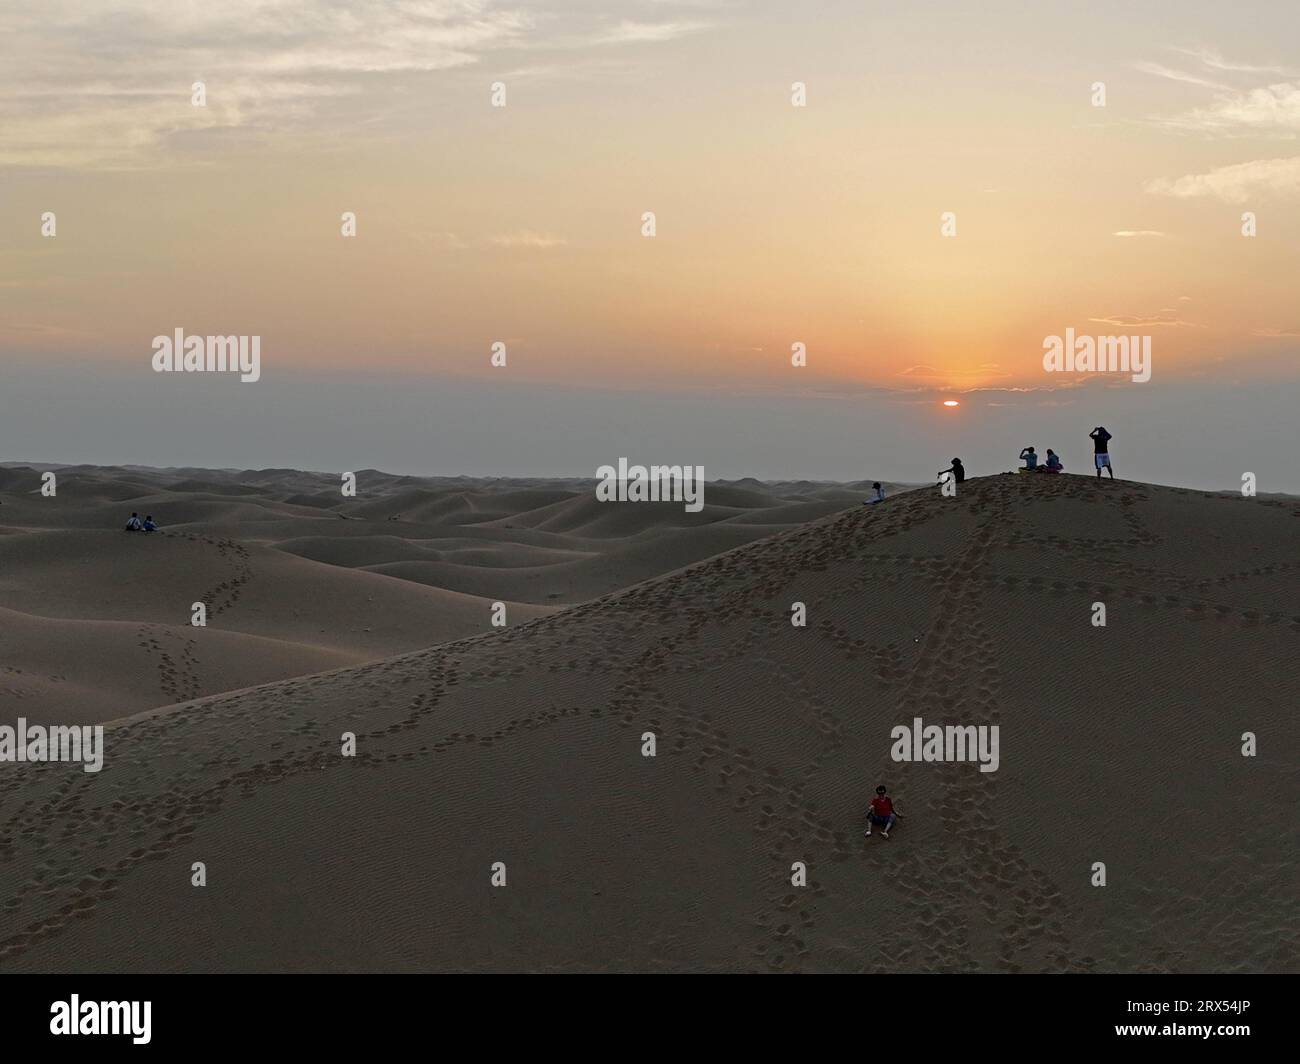 (230923) -- YINCHUAN, Sept. 23, 2023 (Xinhua) -- This aerial photo taken on Sept. 6, 2023 shows tourists enjoying the desert scene in Shapotou District of Zhongwei City, northwest China's Ningxia Hui Autonomous Region. Shapotou, literally meaning 'high sand dunes,' is a place where the Tengger Desert and the Yellow River meet. This district was faced with severe wind-sand damages, where shifting yellow sands covered farmland. Through years of dedicated efforts, local people have been combating desertification with grass pane sand fence and sand-fixing system, halting the spread of desert. (Xin Stock Photo